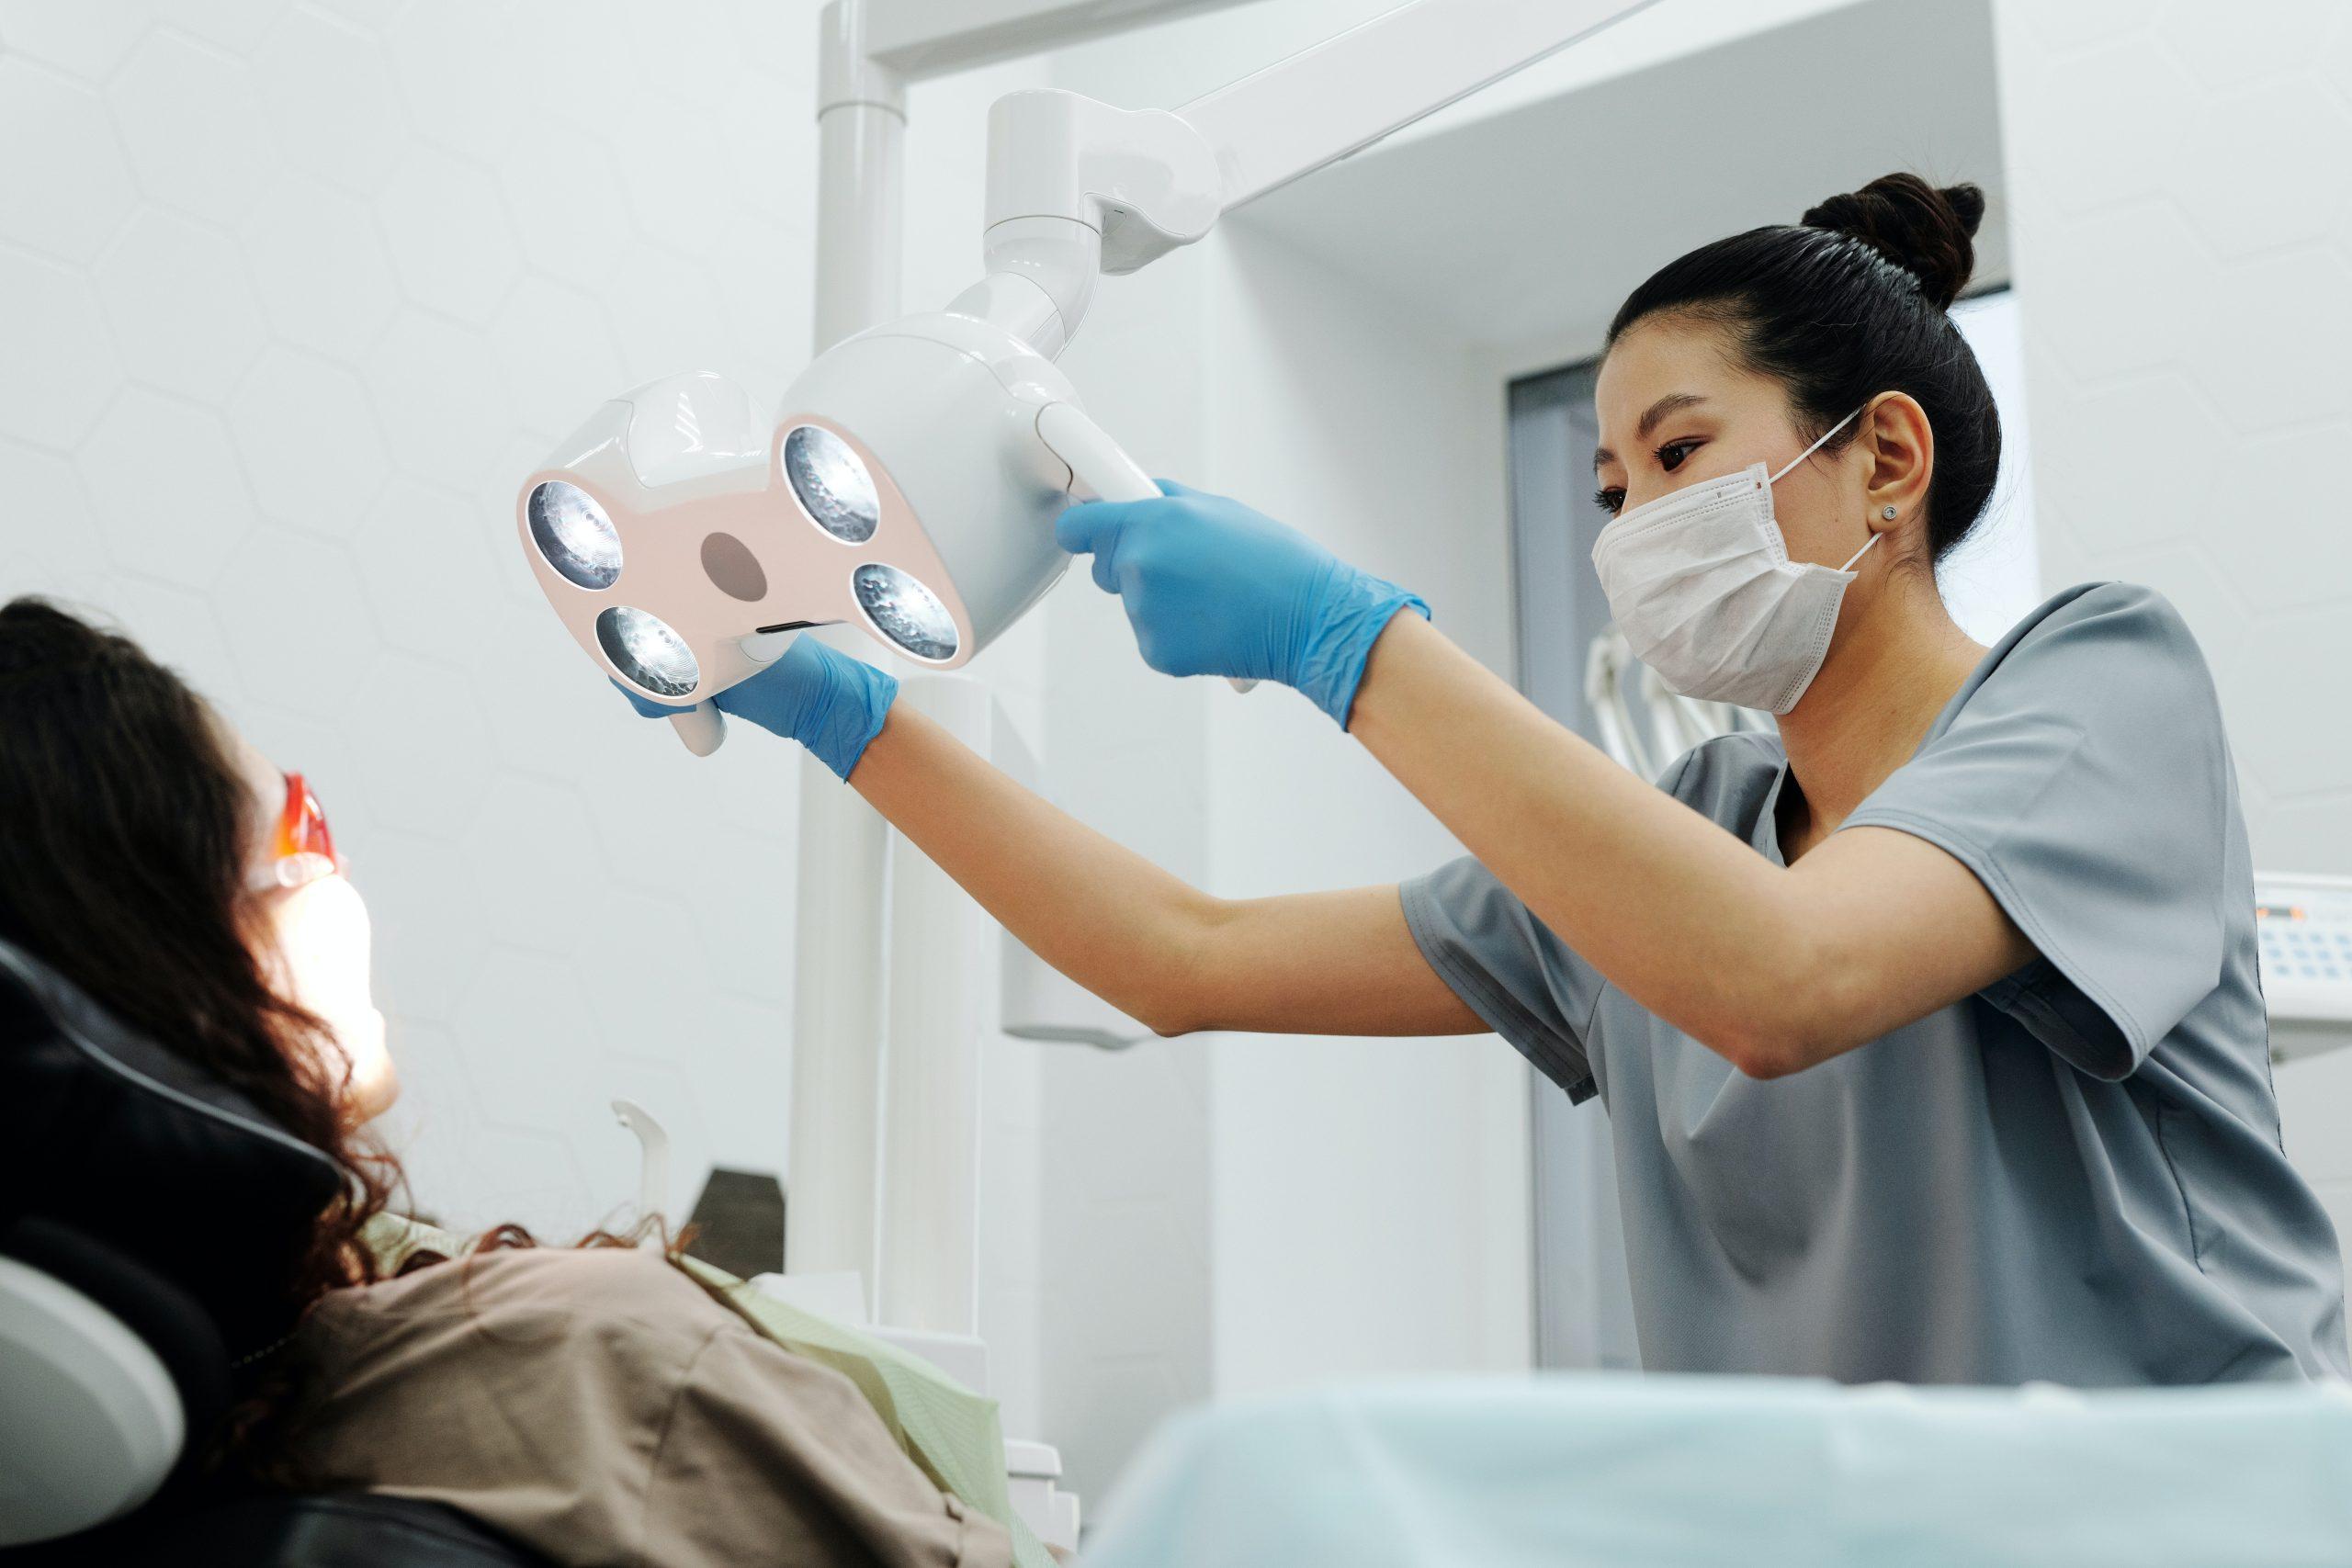 Read More About The Article Sedation Dentistry